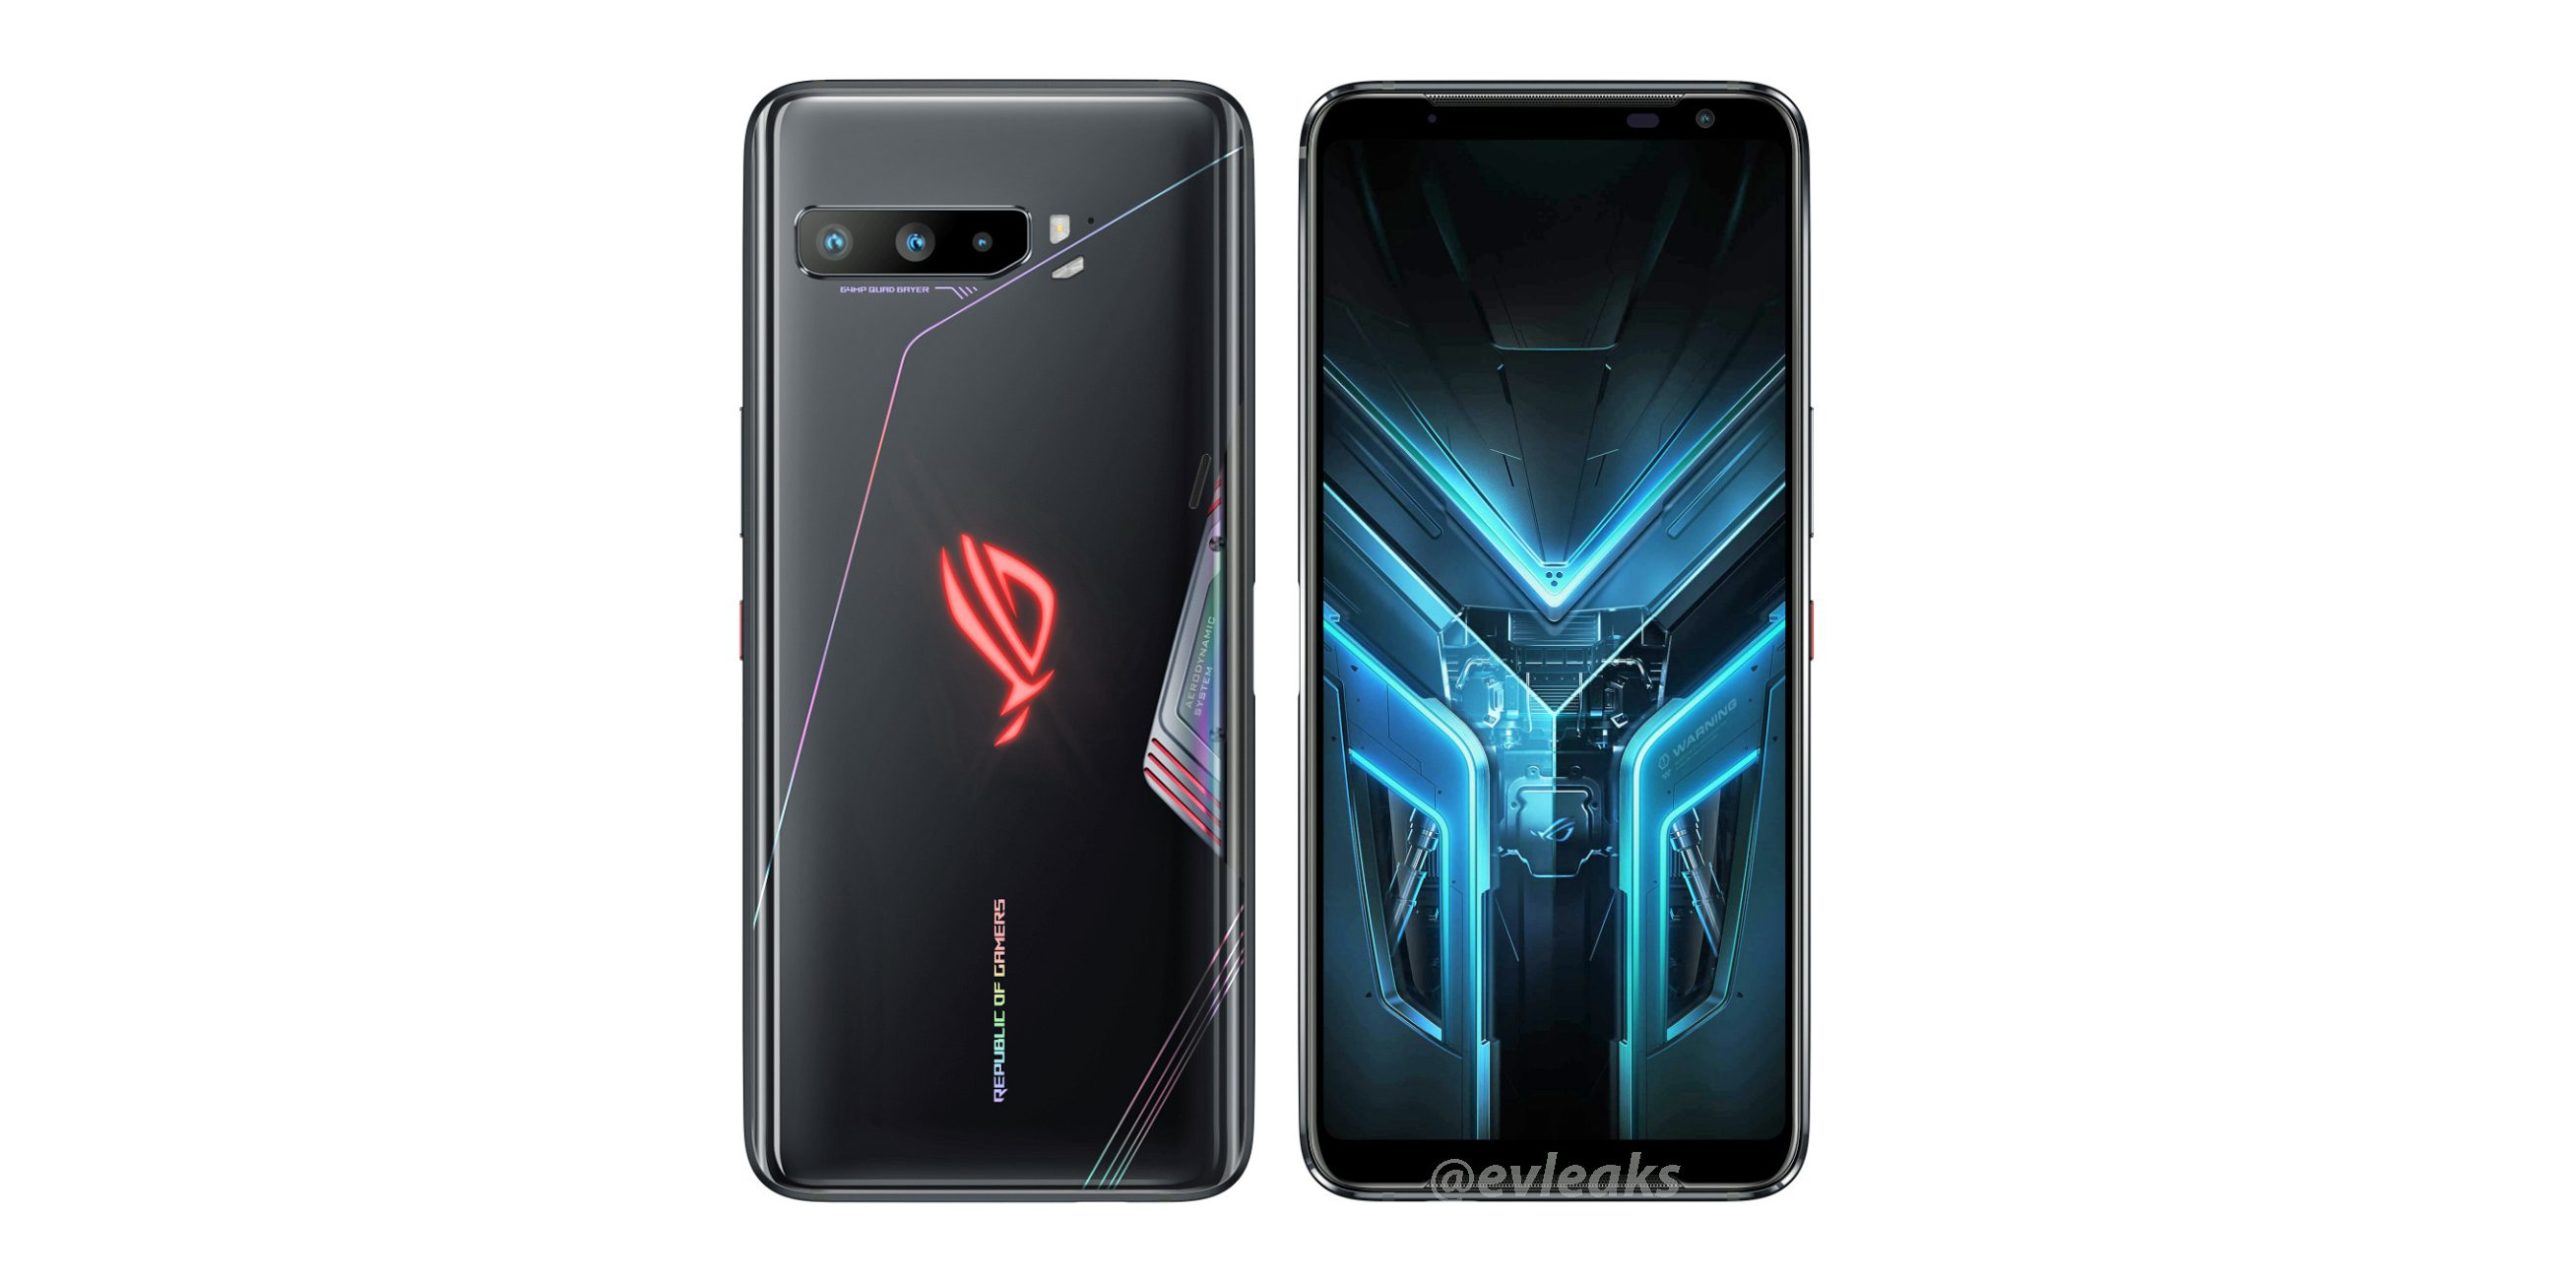 How to Root Asus ROG Phone 3 with Magisk without TWRP